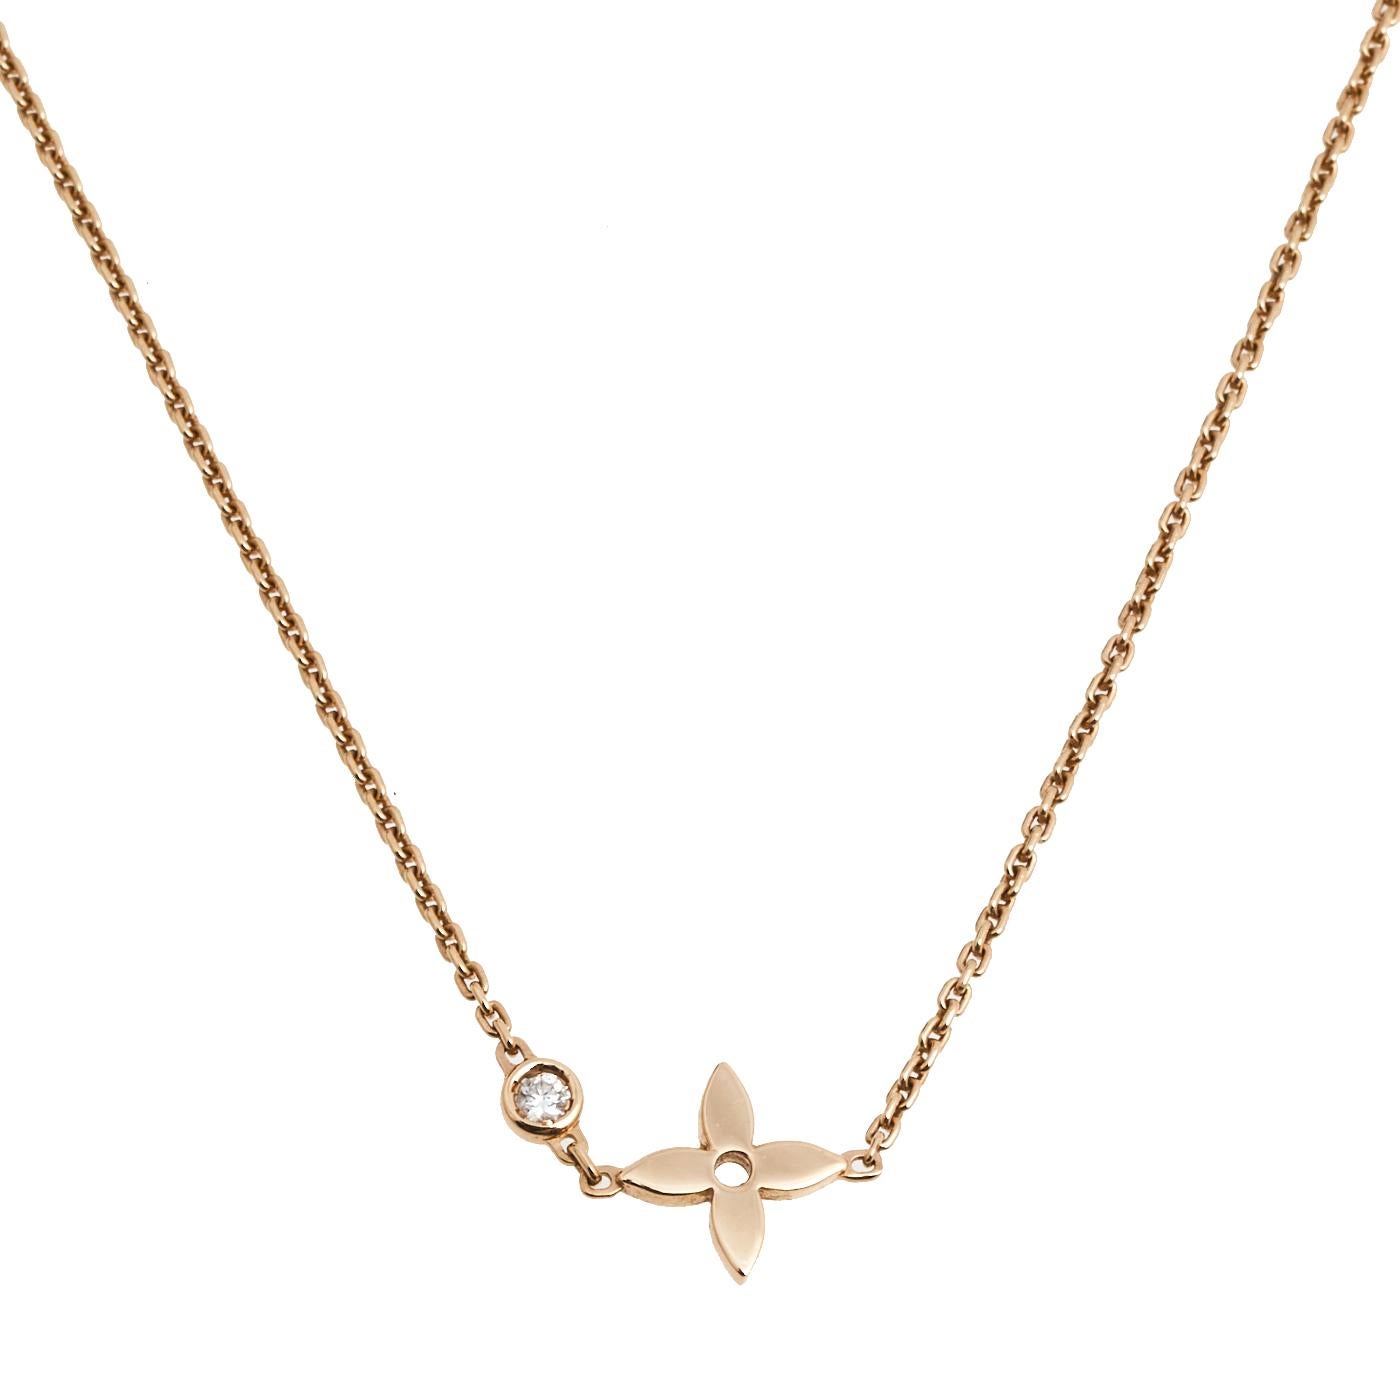 Show your love for fine artistry and luxury accessories with this stunning necklace from Louis Vuitton. The Monogram flowers, created by Georges-Louis Vuitton, come alive in this creation through a single flower pendant. The precious piece is